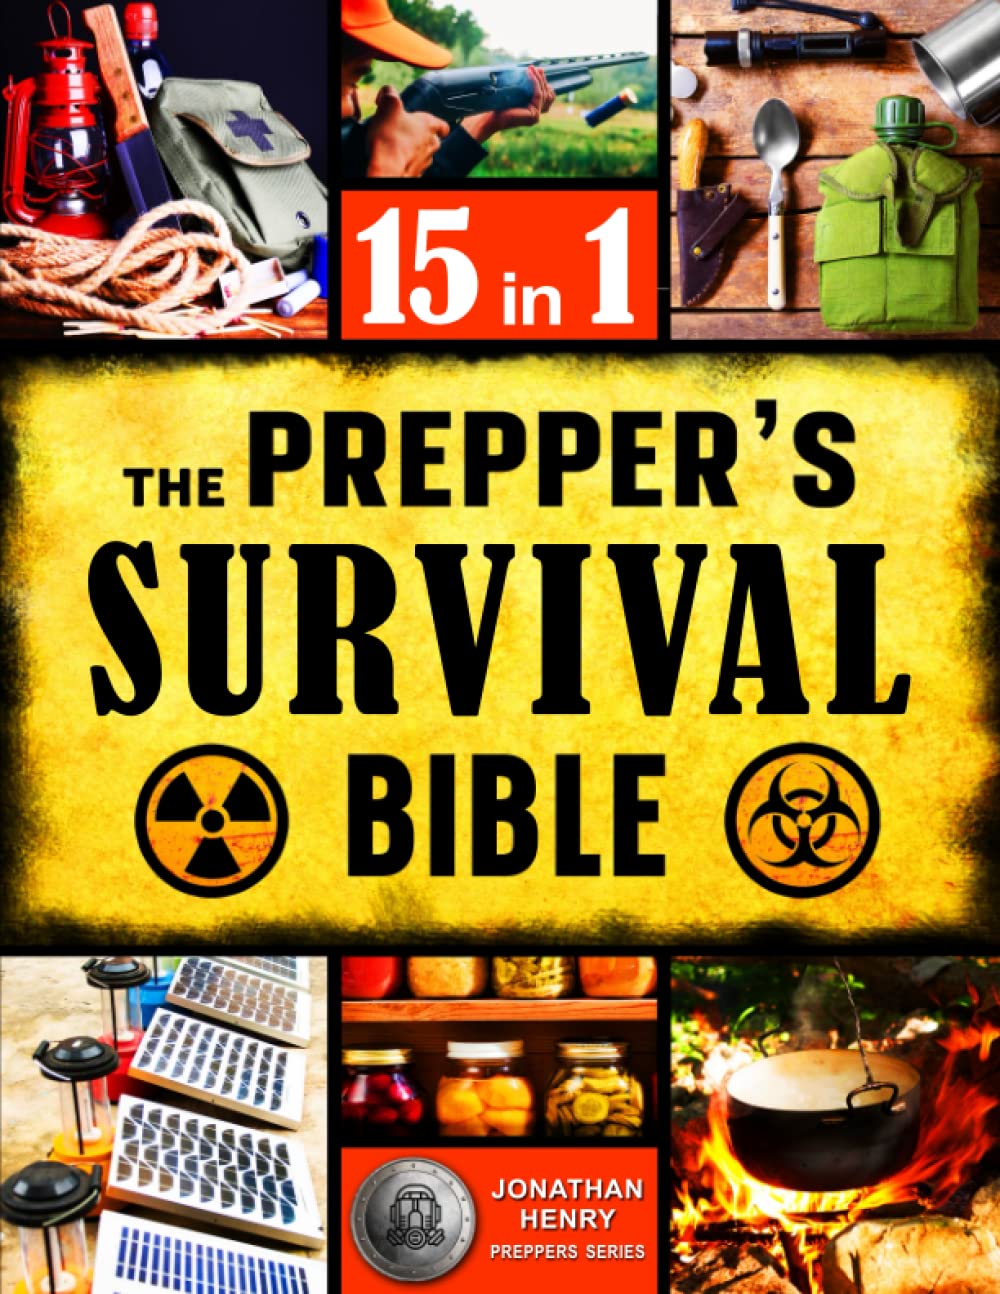 The Prepper’s Survival Bible: 15 in 1. The Ultimate Guide to Long-Term Survival. Stockpiling, Home Defense, First Aid, Security and More Life-Saving Solutions for Self-Sufficient Living Off-the-Grid